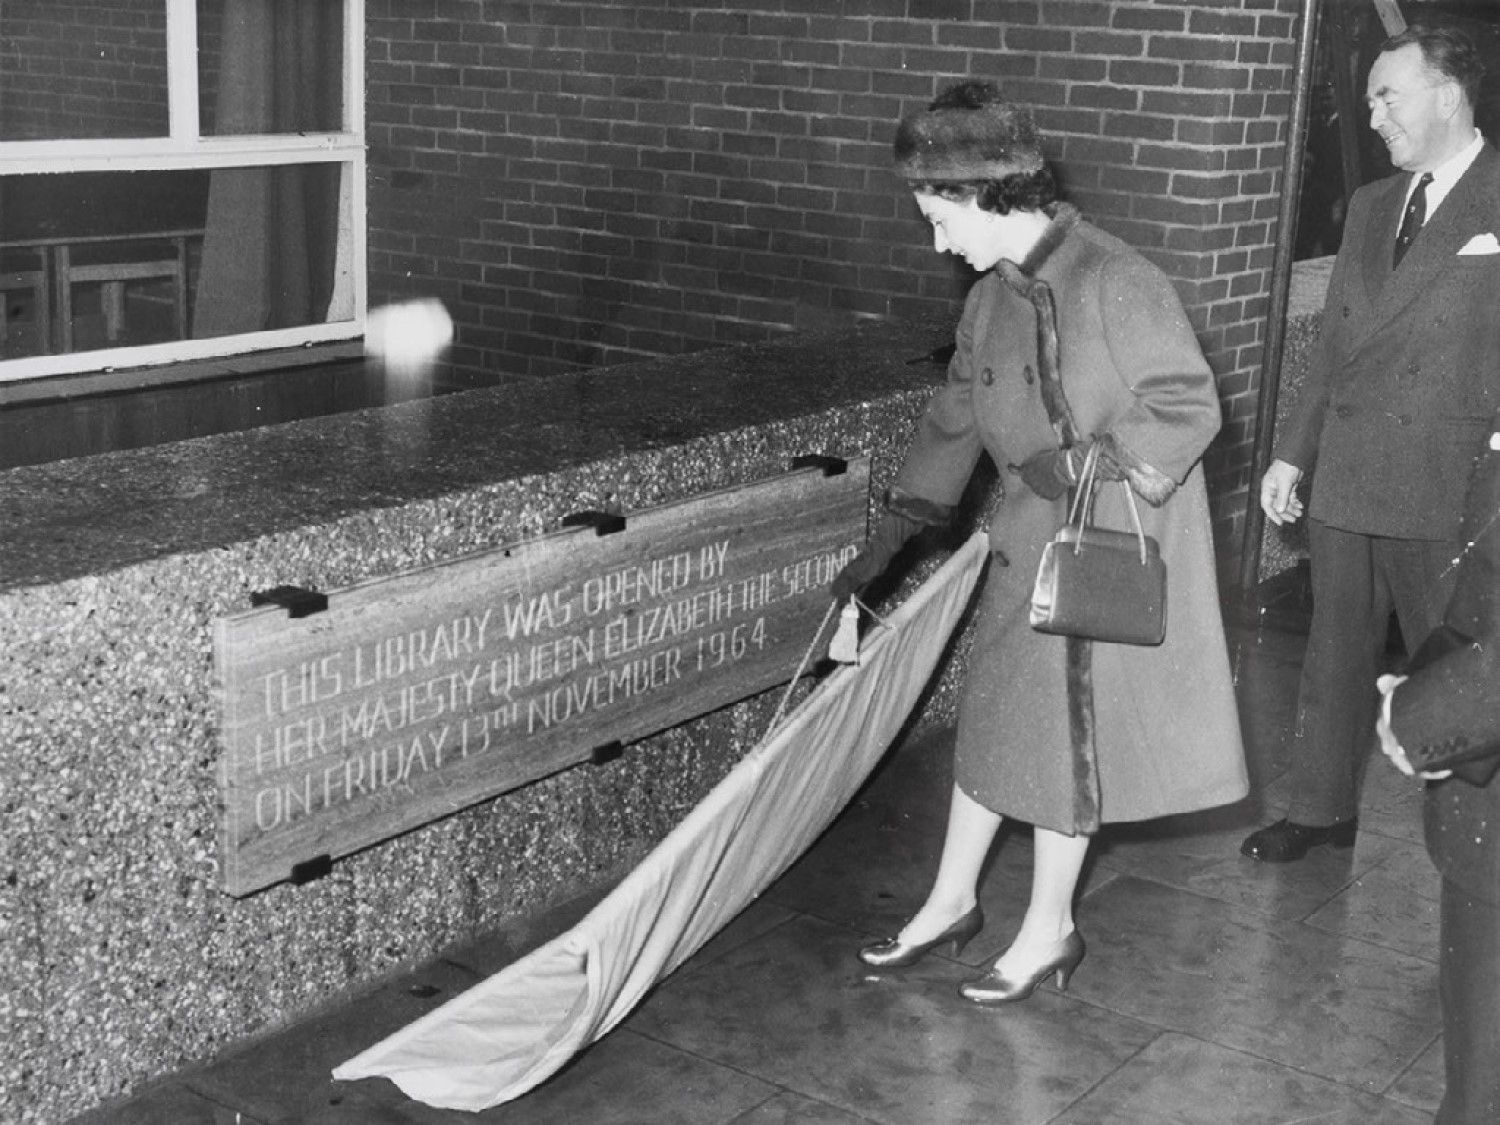 The Queen officially unveils a plaque that reads as follows: This Library was opened by Her Majesty Queen Elizabeth The Second on Friday 13th November 1964